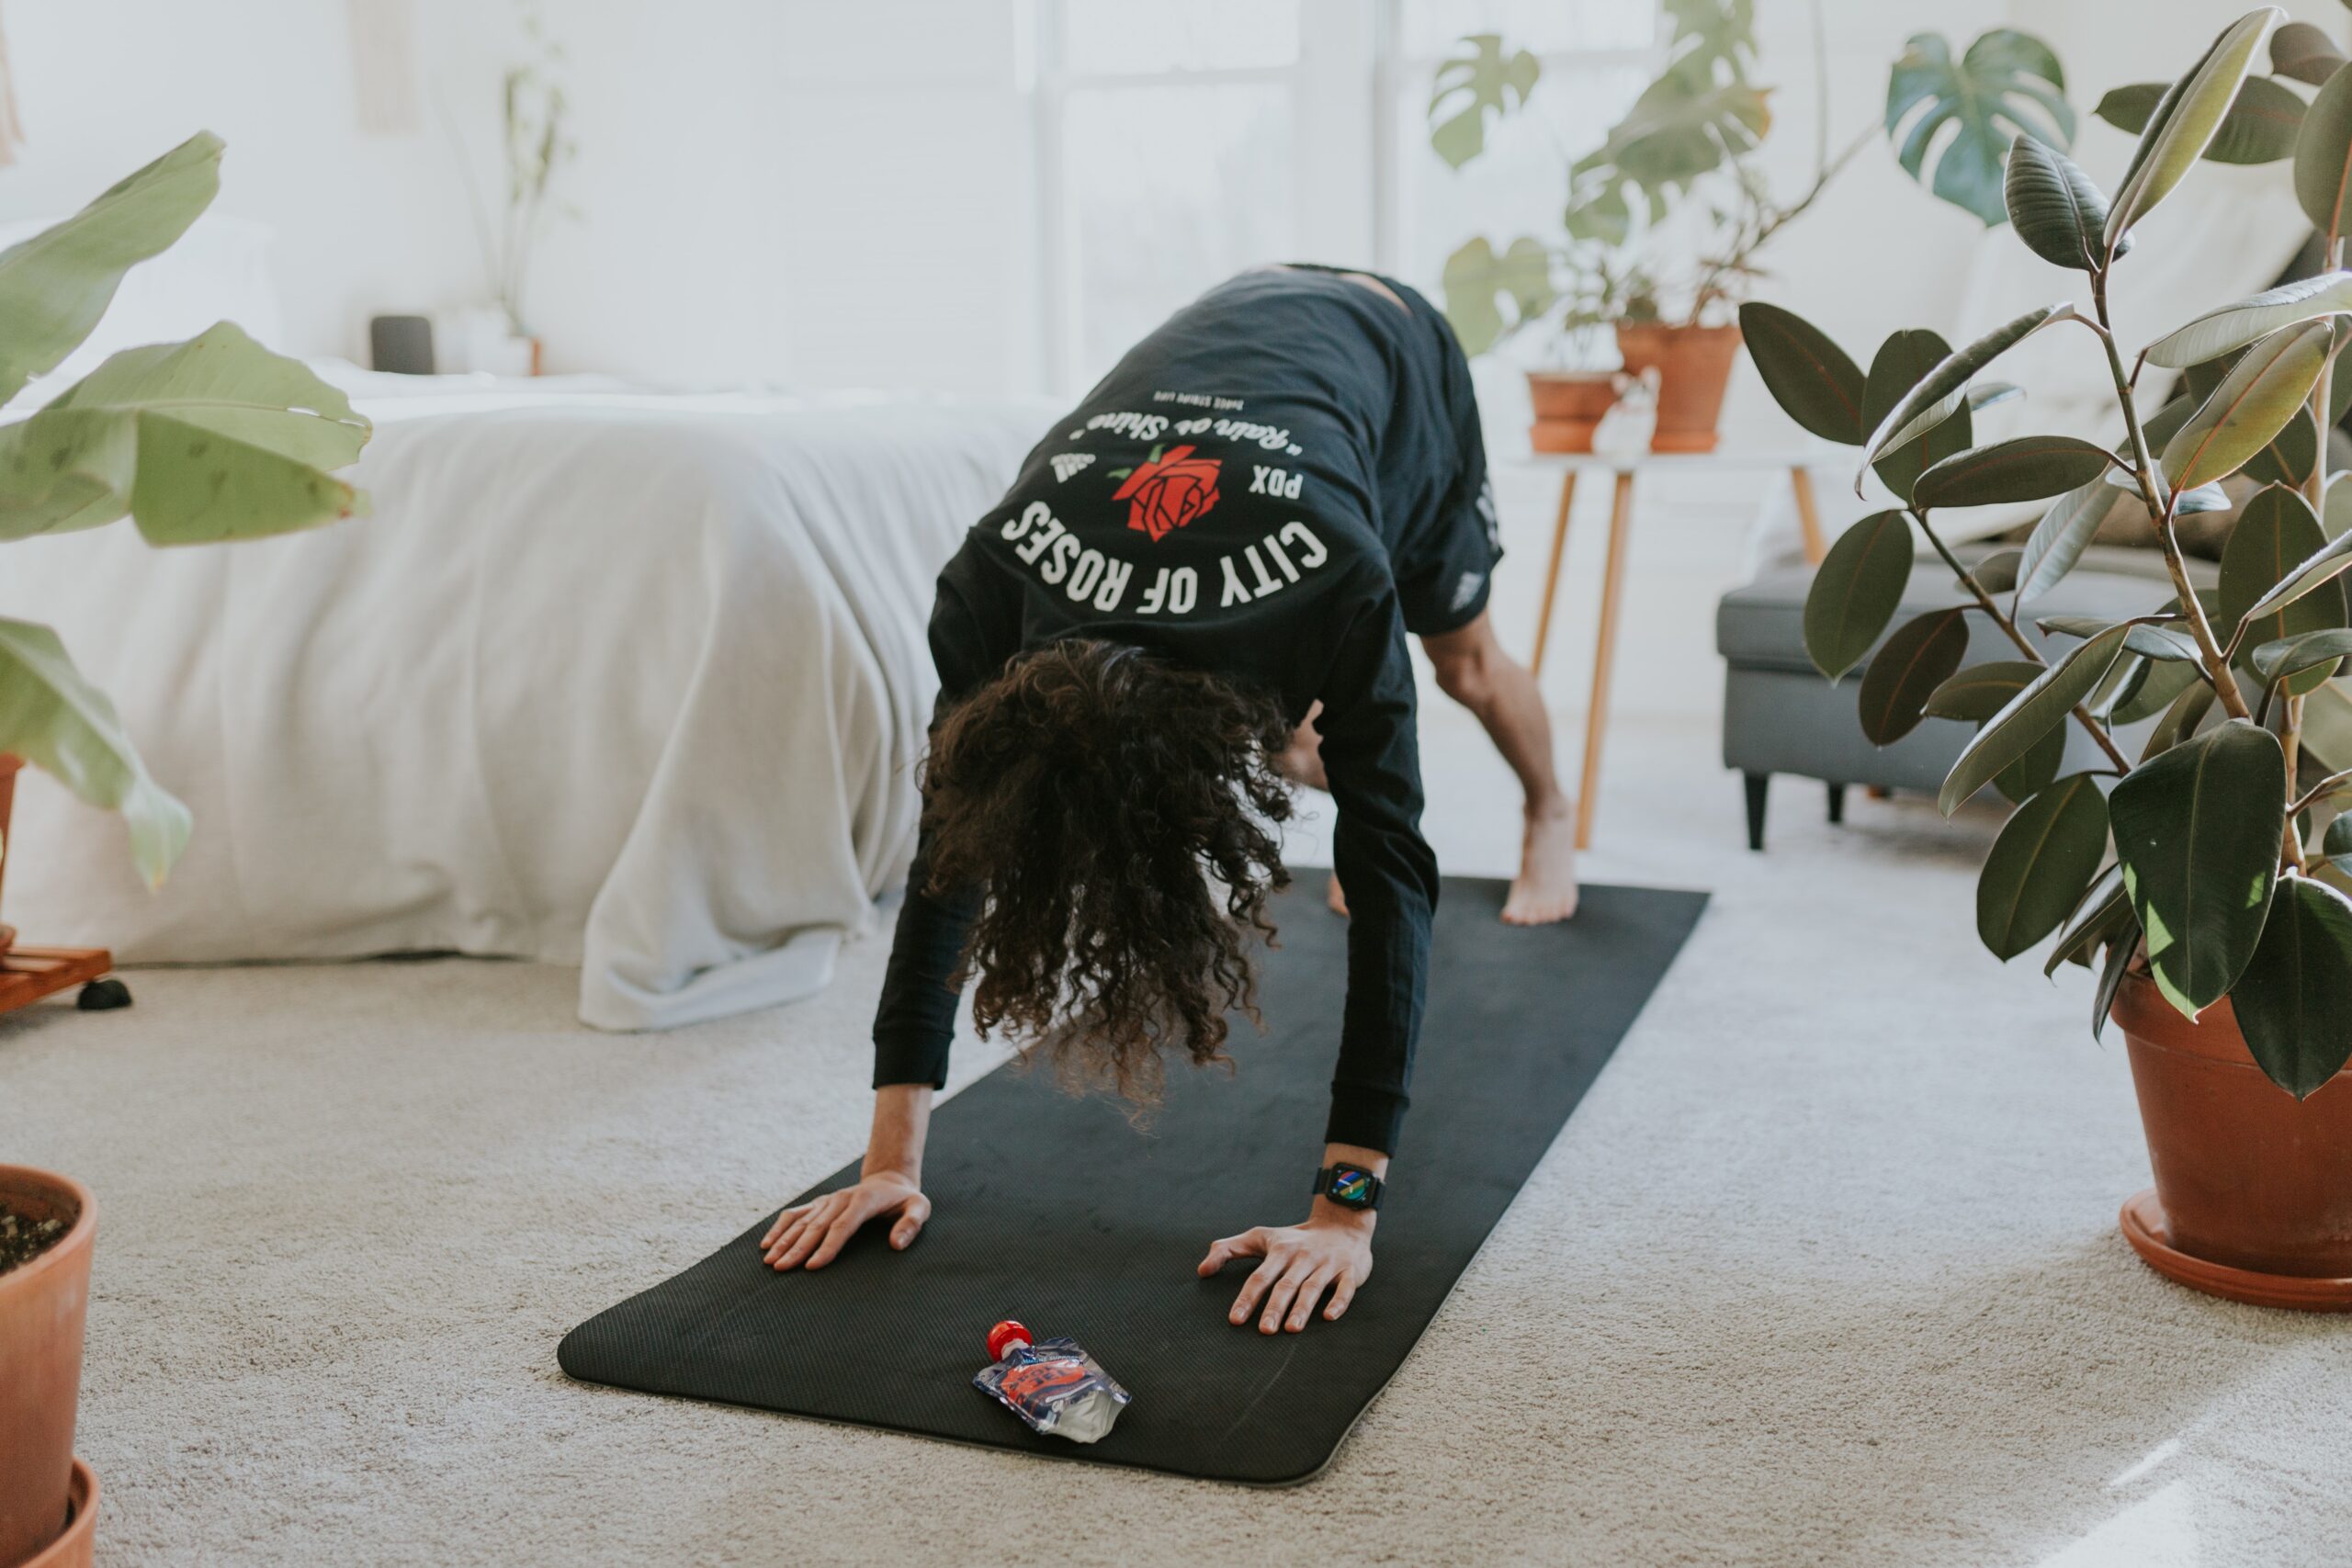 2021 Guide to At-Home Pilates Workouts